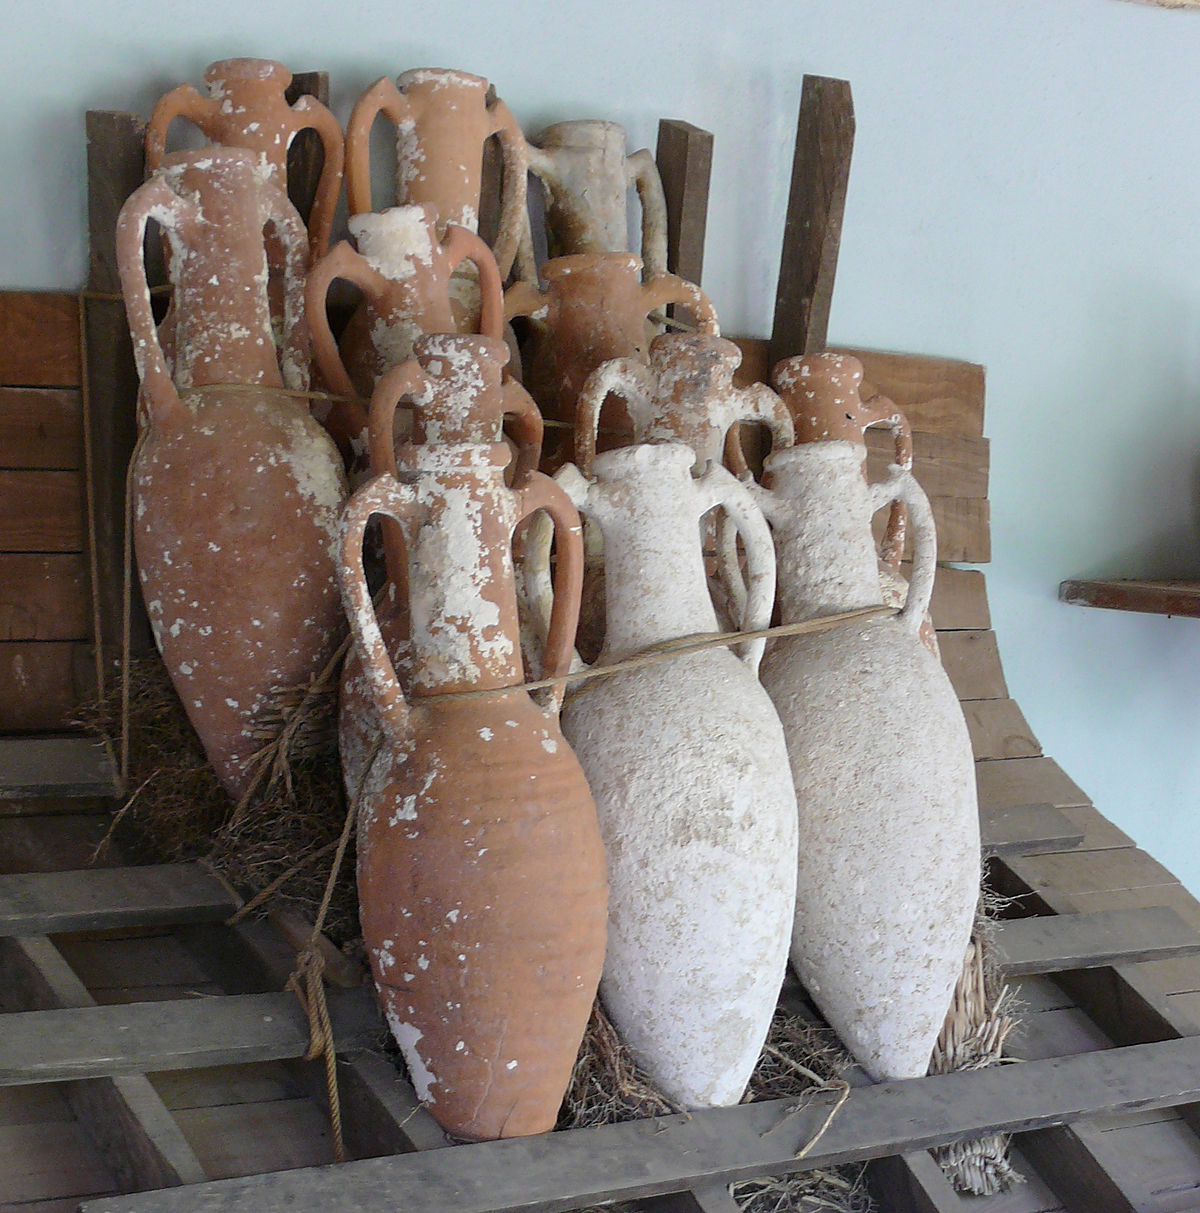 Amphoras stacked on each other